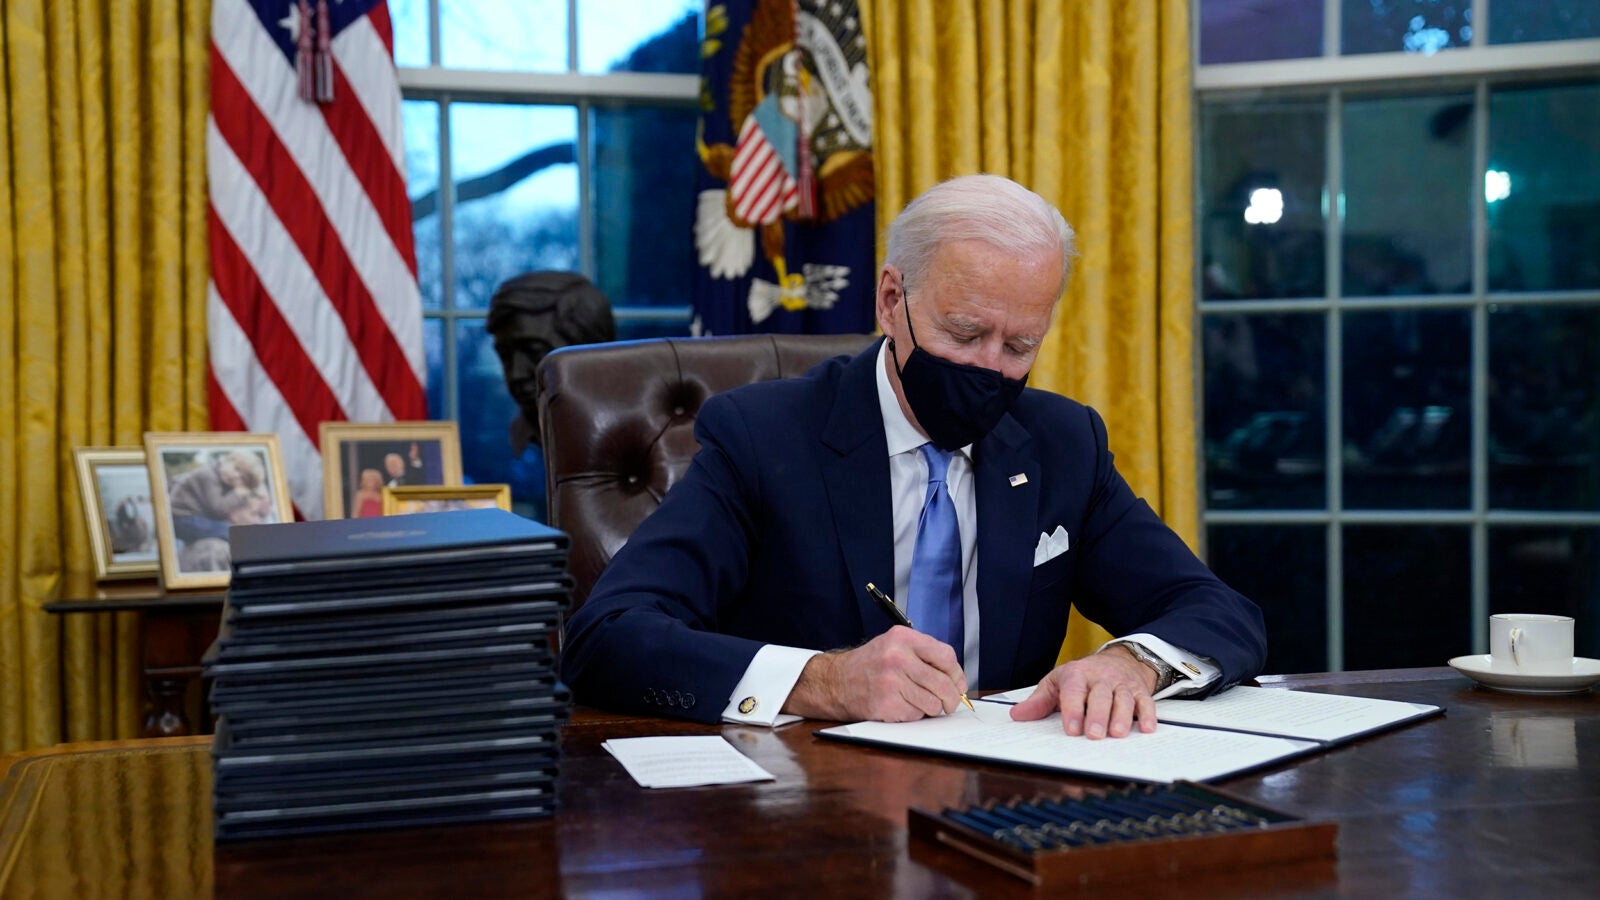 Joe Biden signs his first executive orders in the Oval Office.